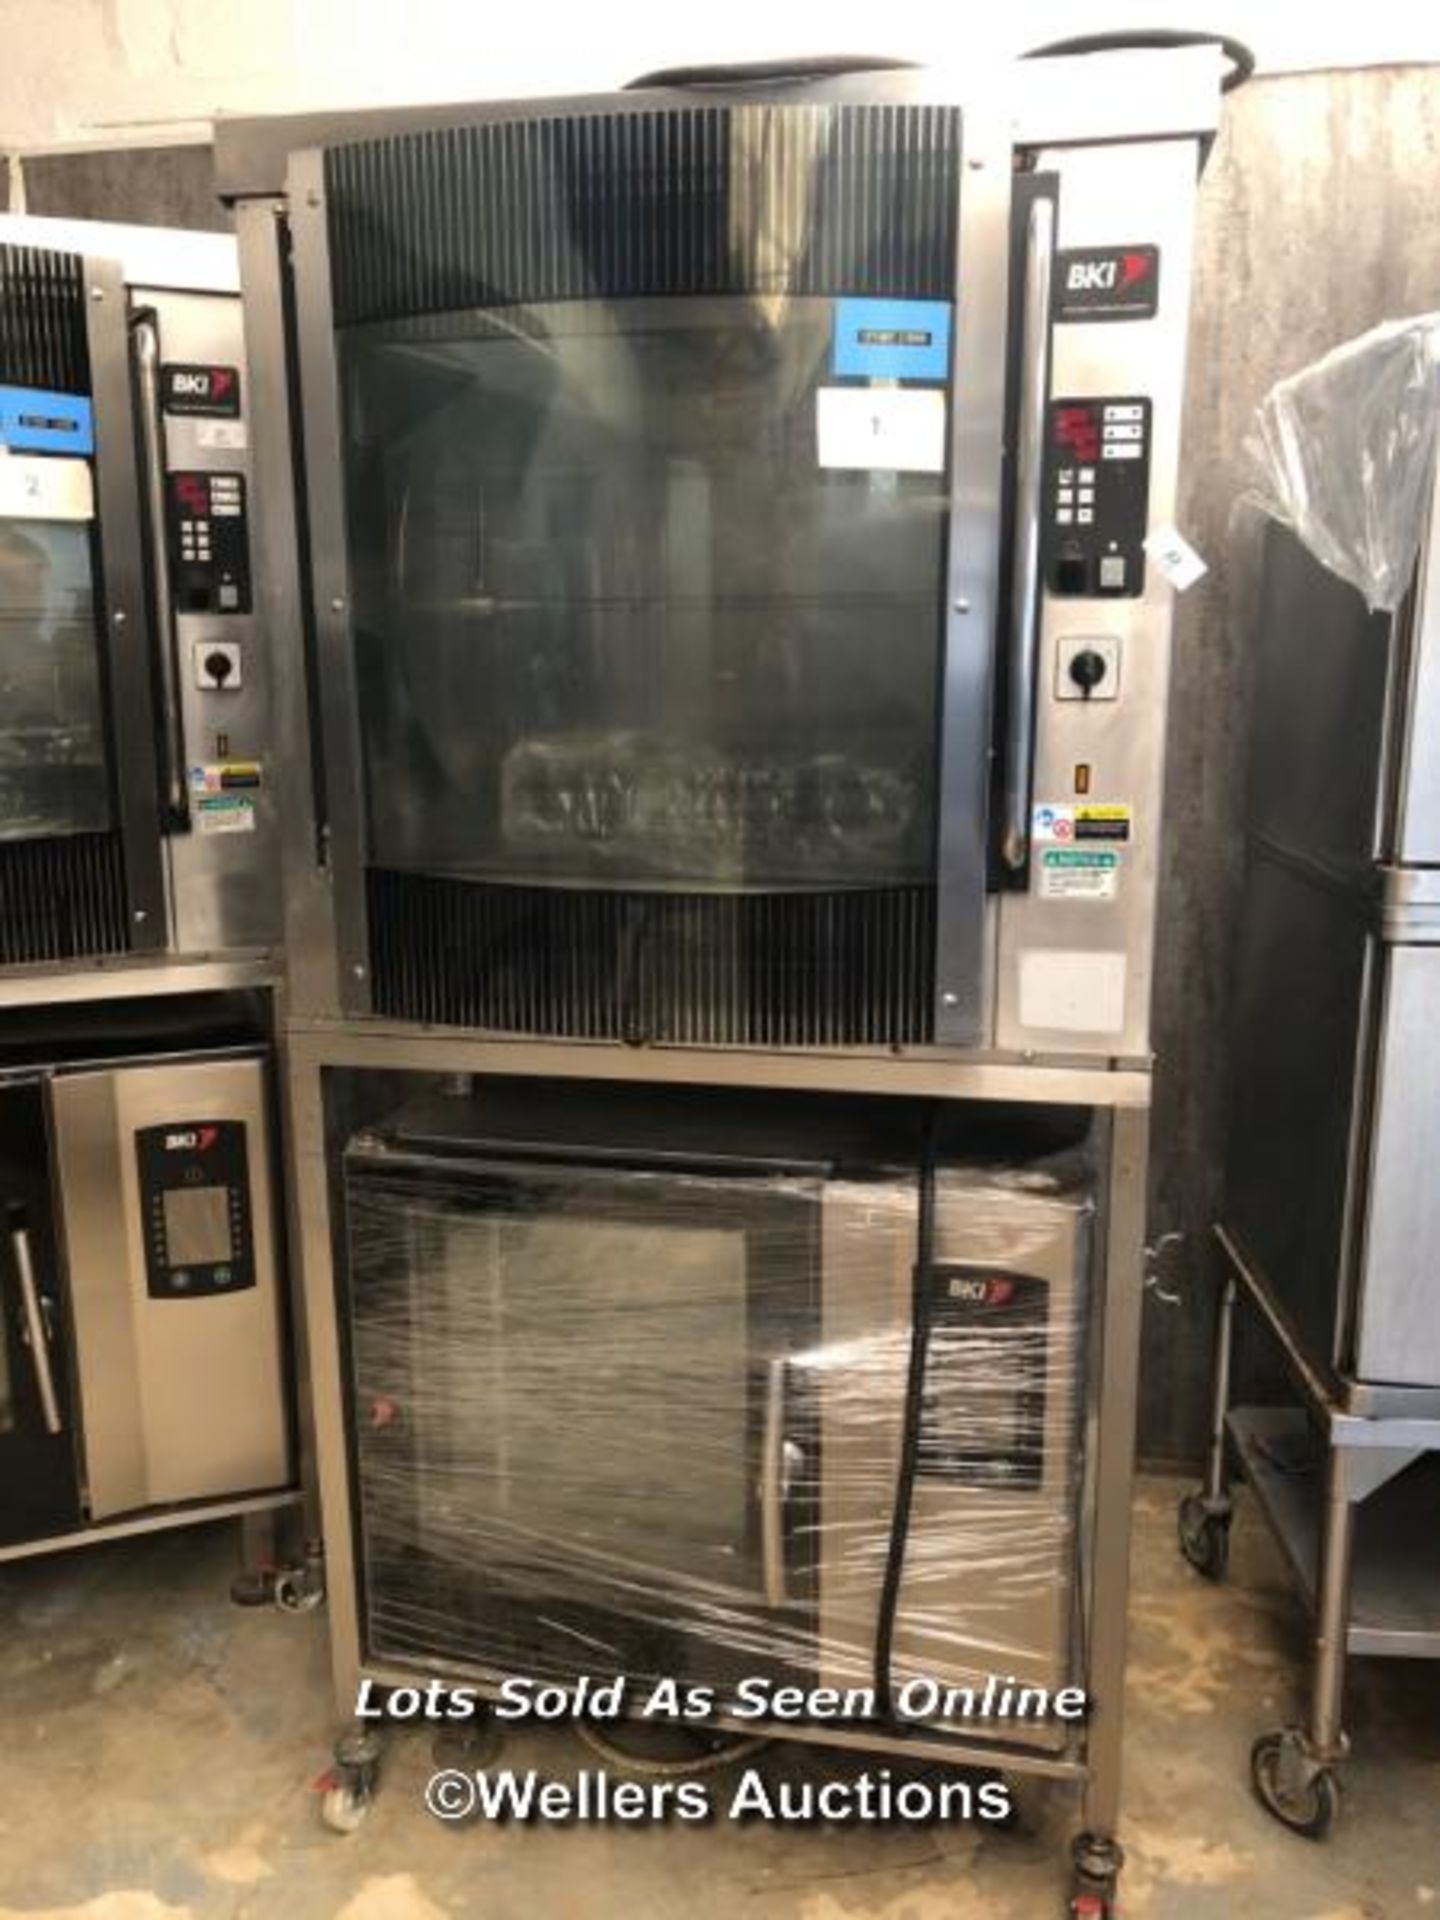 BKI CHICKEN ROTISSERIE AND BKI 6-GRID COMBI OVEN, 3-PHASE ELECTRIC, ON CASTERS, TOTAL DIMENSIONS: